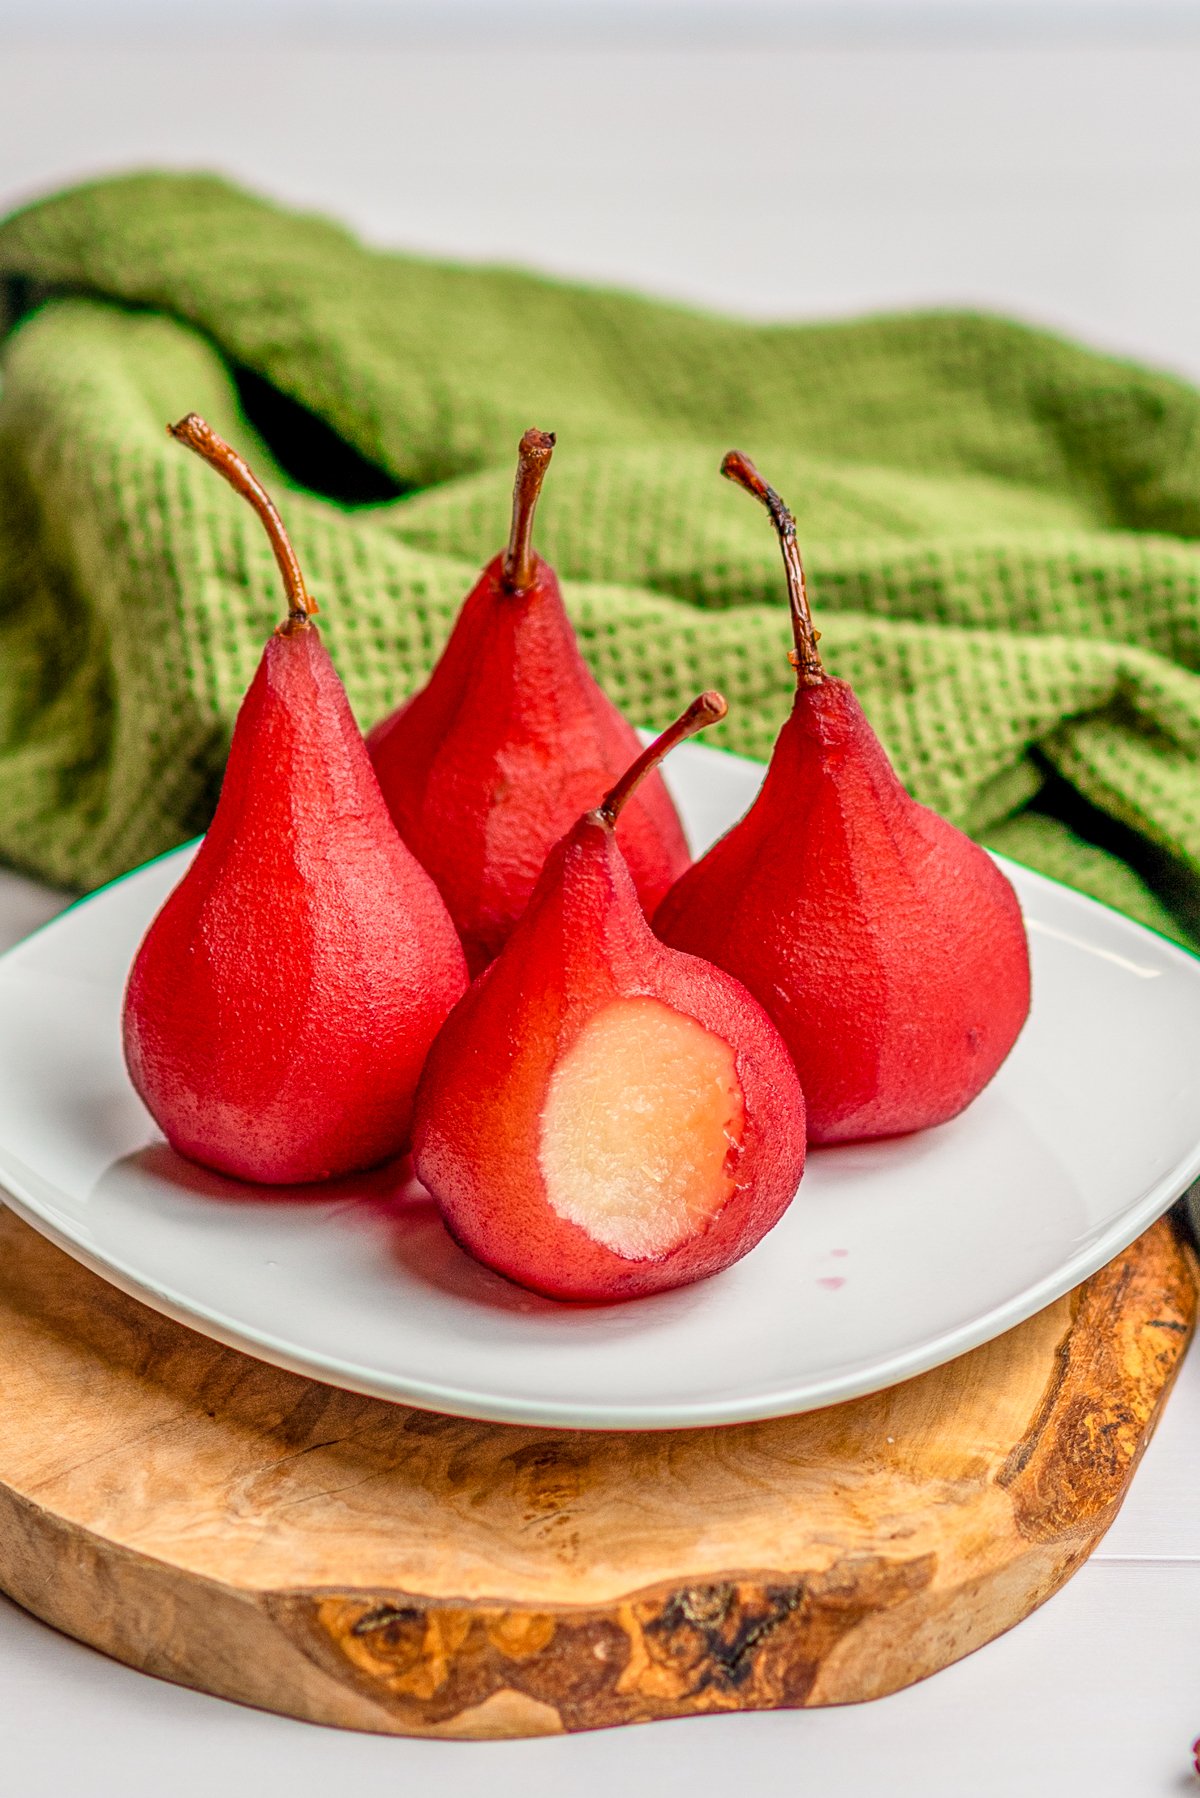 Four Poached Pears on white plate with bite taken out of one.